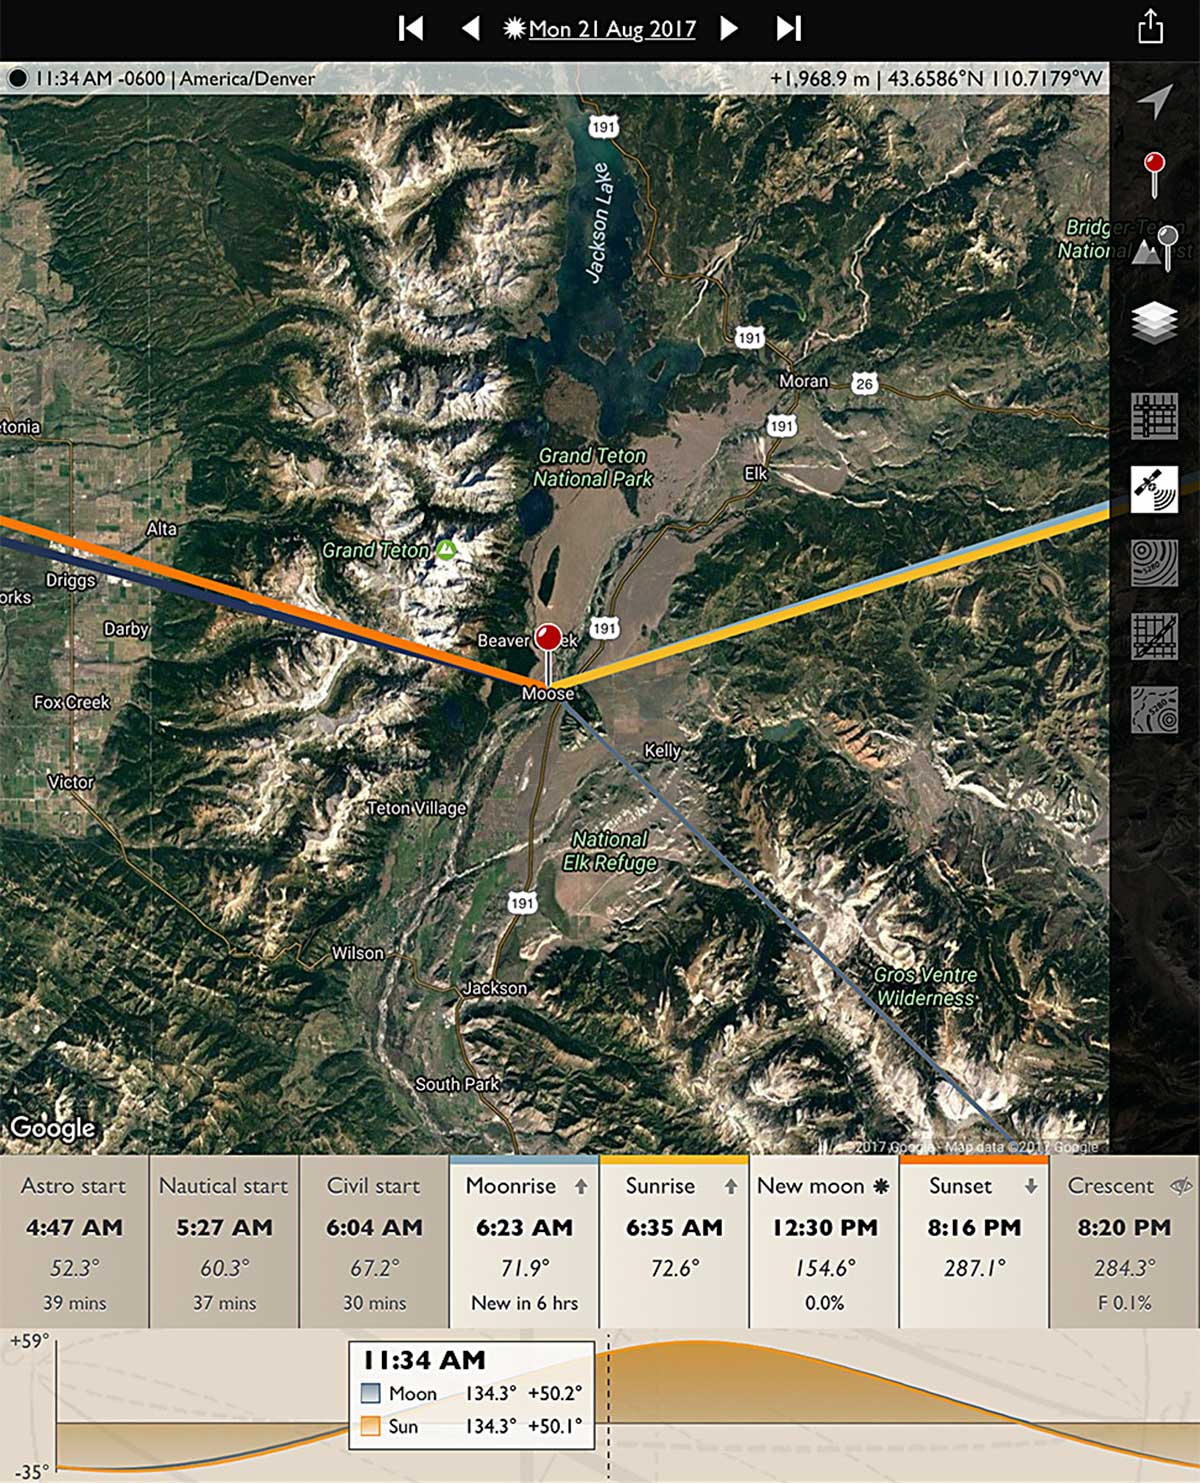 Map of Teton site of eclipse 2017 by Alan Dyer 